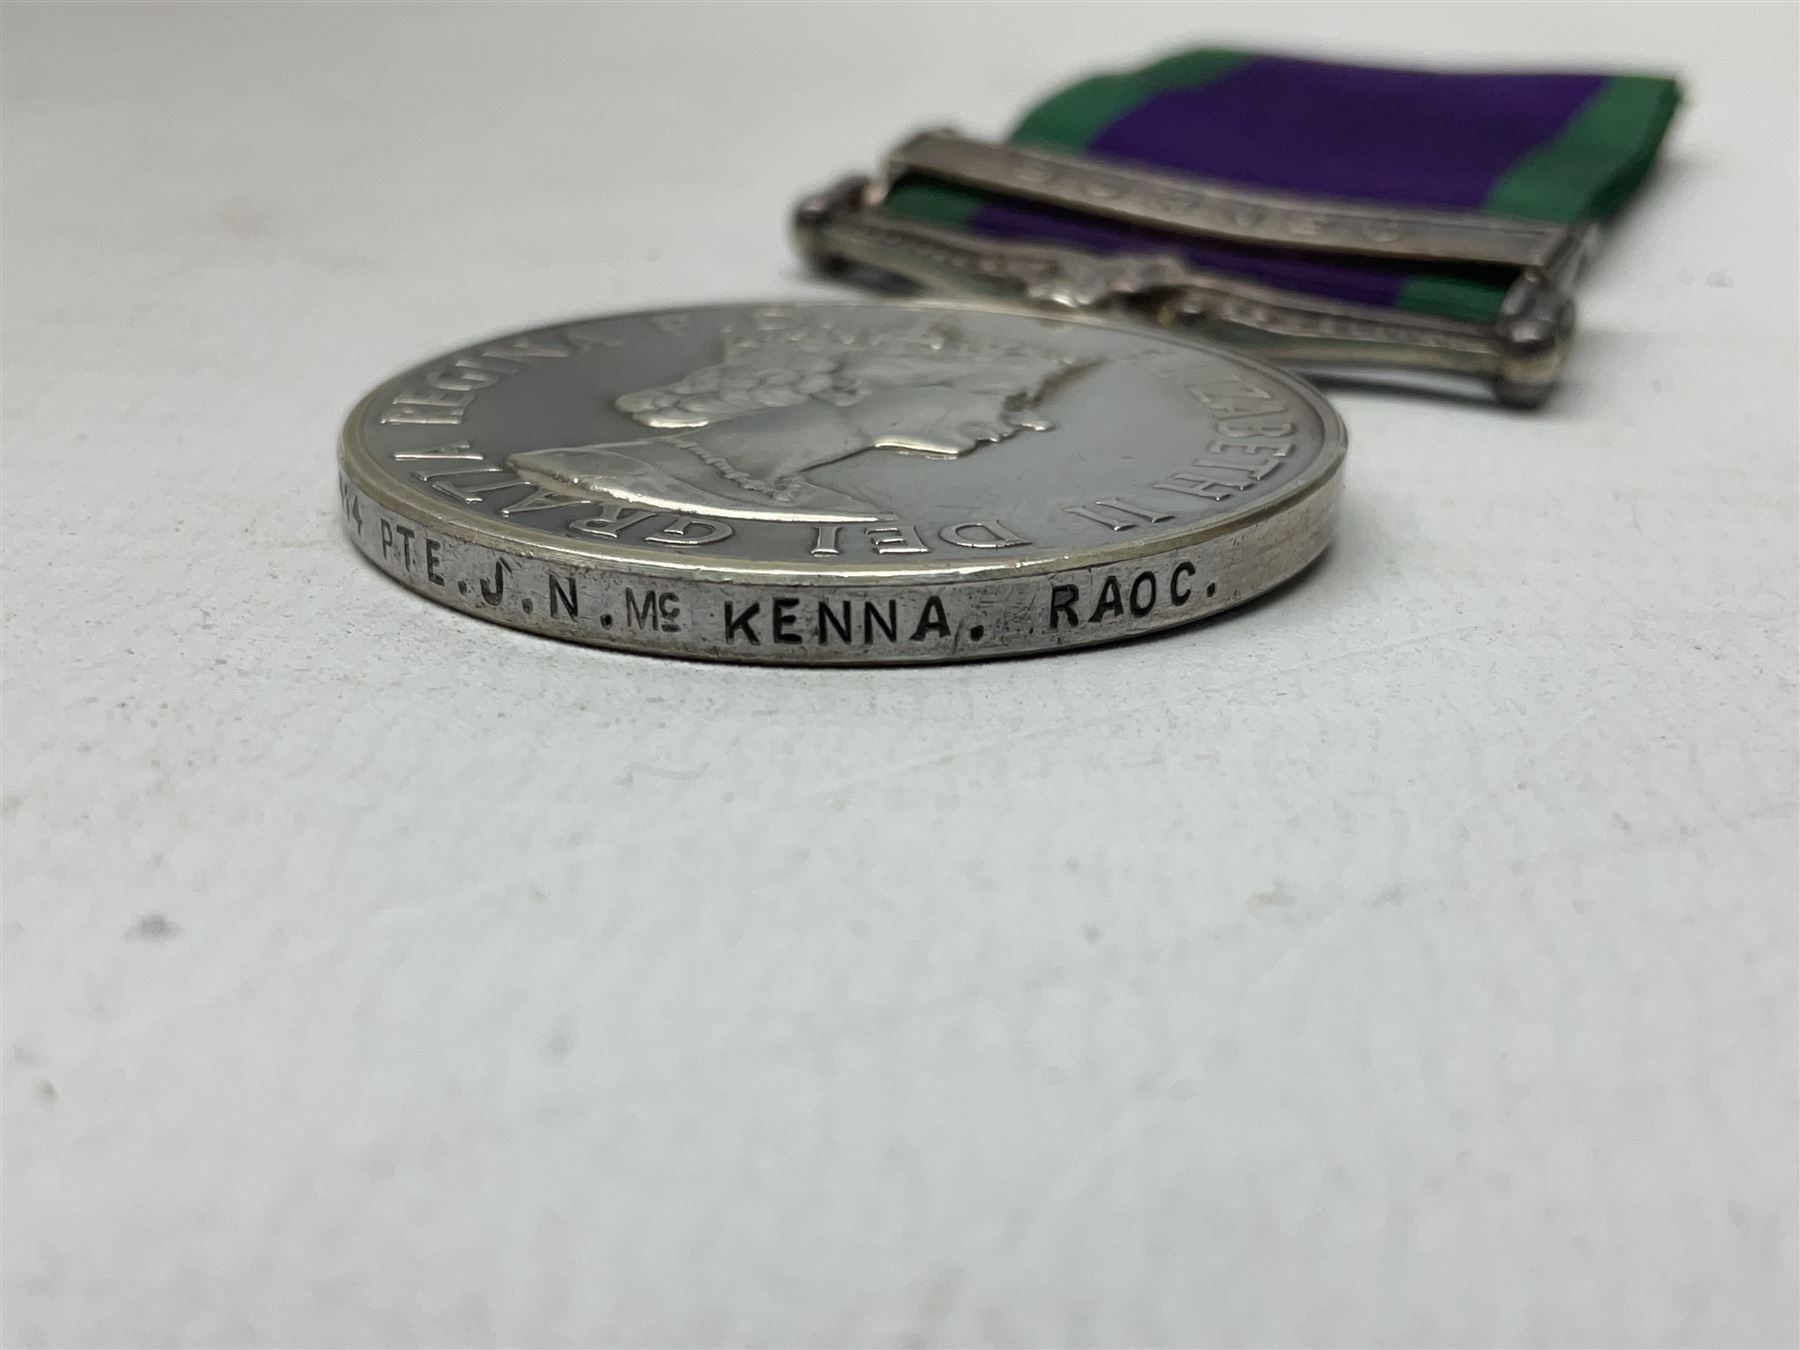 Elizabeth II General Service Medal with Borneo clasp awarded to 23919414 Pte. J.N. McKenna RAOC; wit - Image 4 of 6